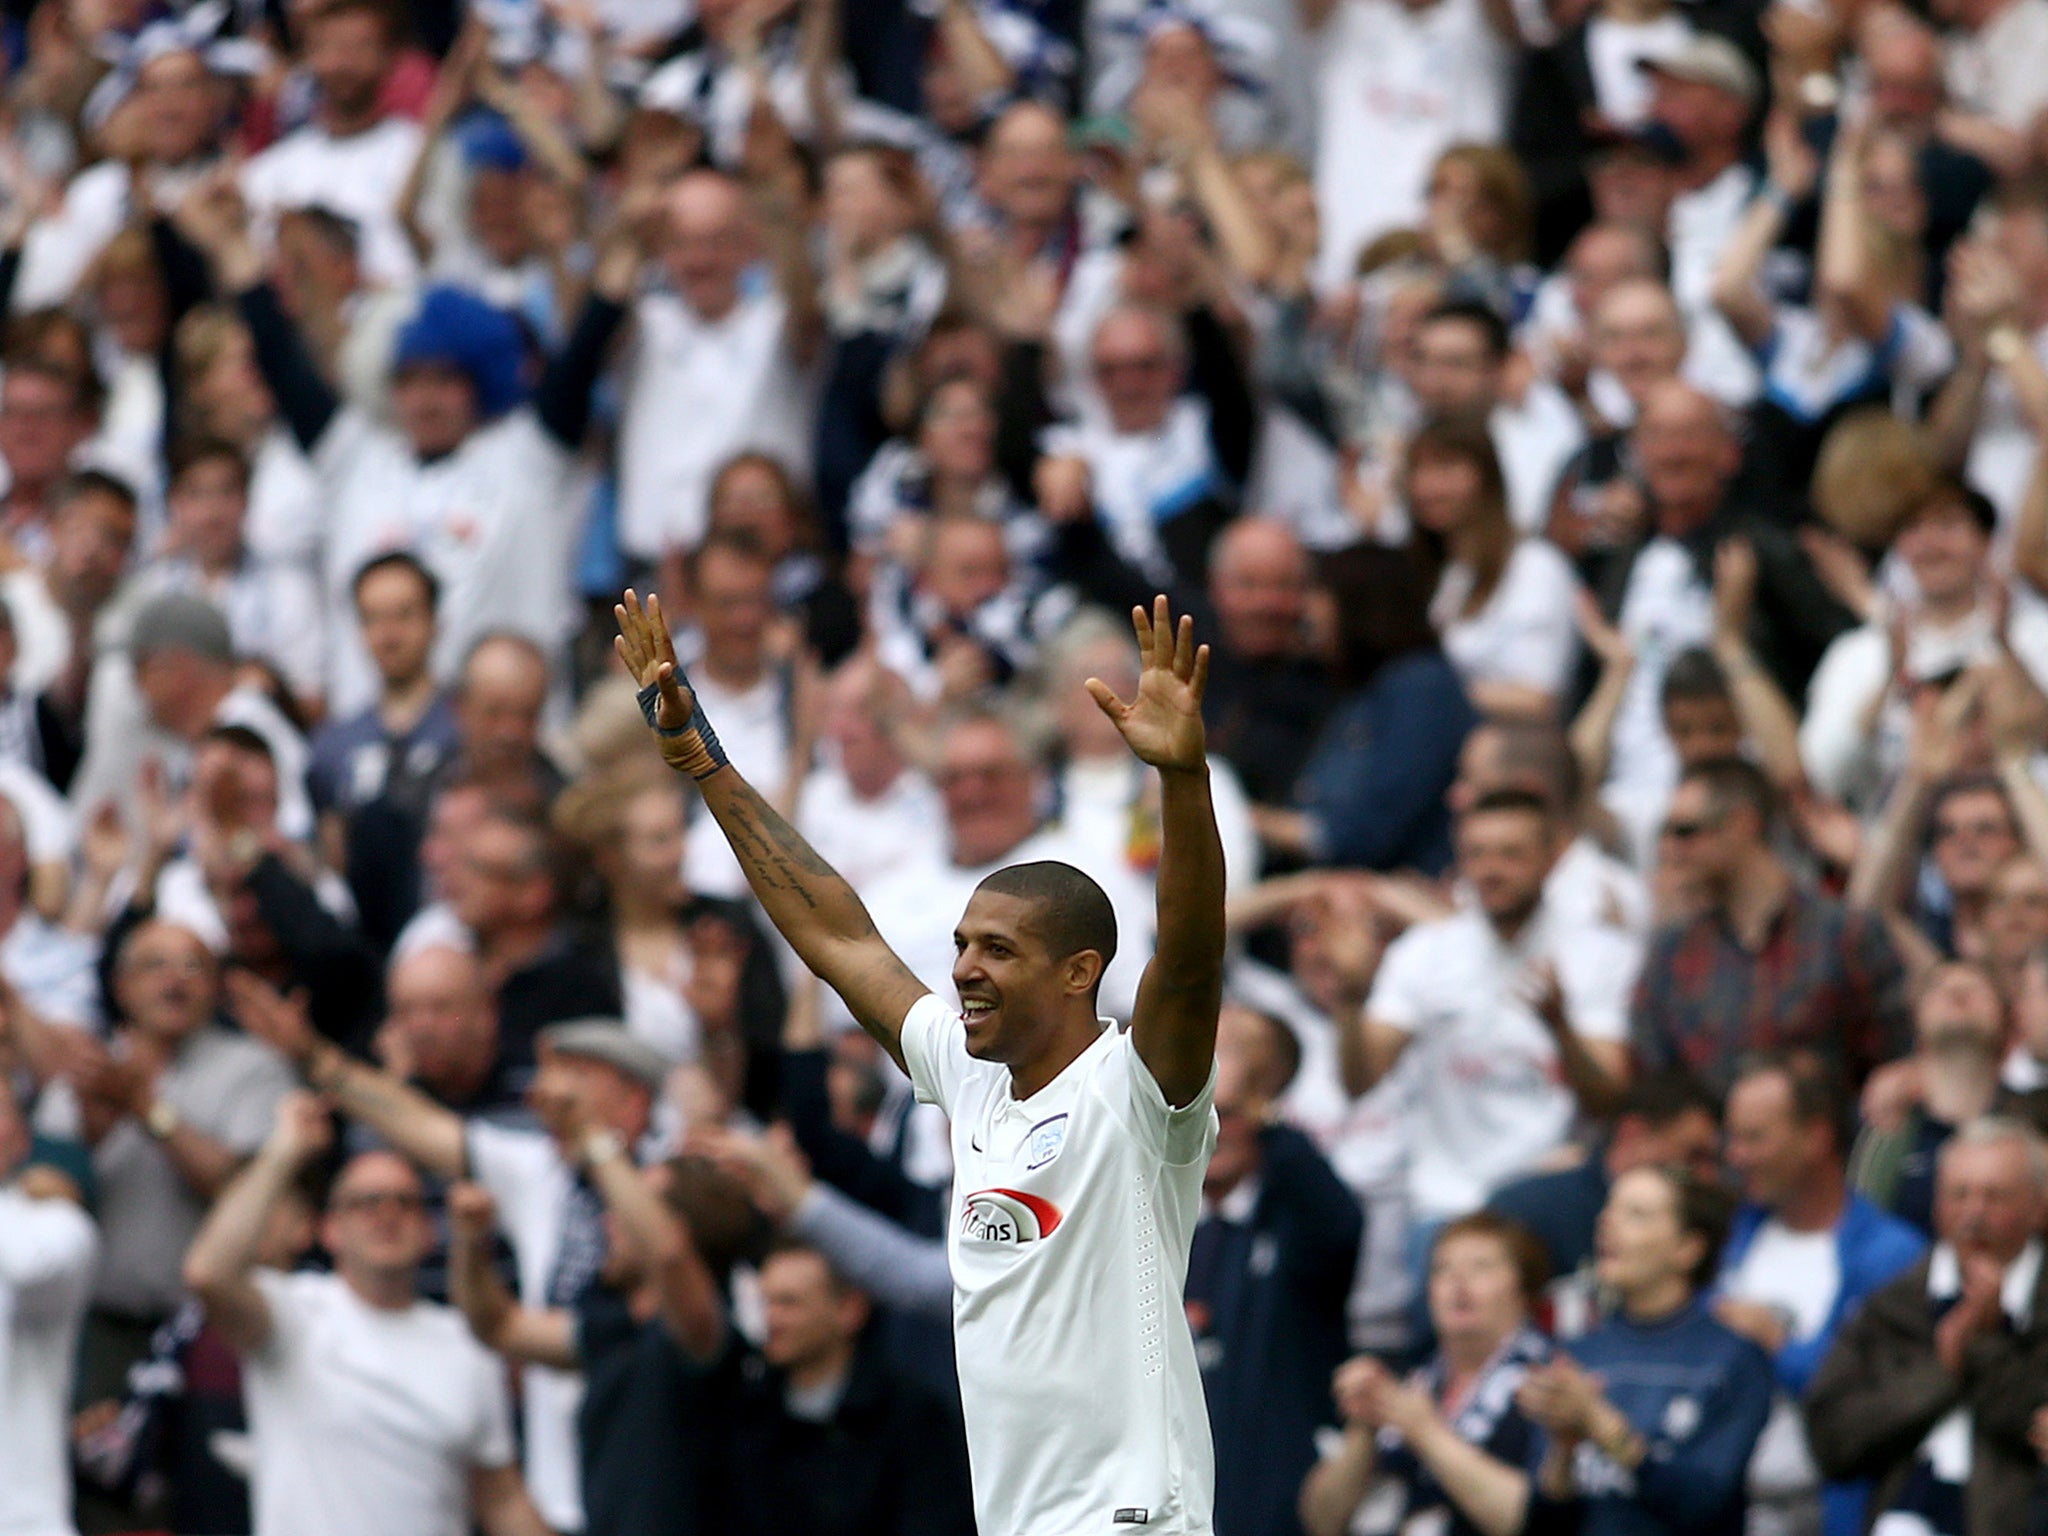 Jermaine Beckford scored a hat-trick as Preston were promoted to the Championship